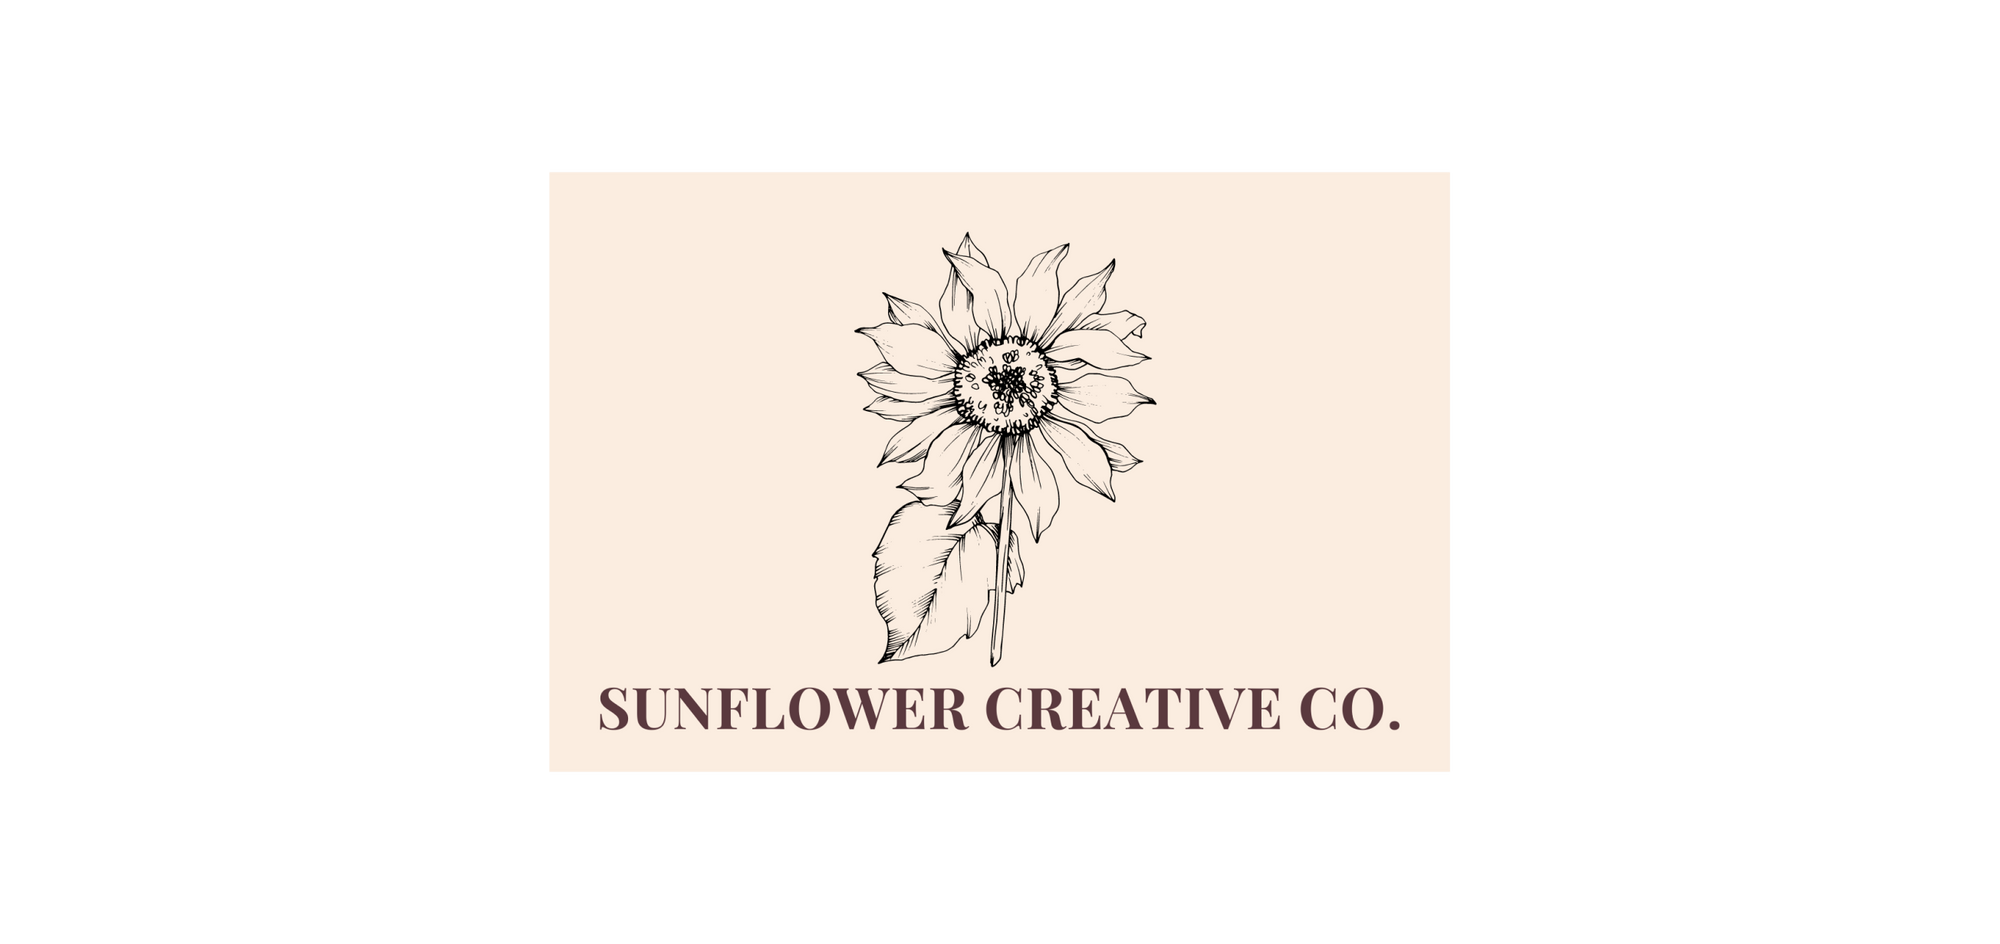 Producing Invaluable Content - Sunflower Creative Co.